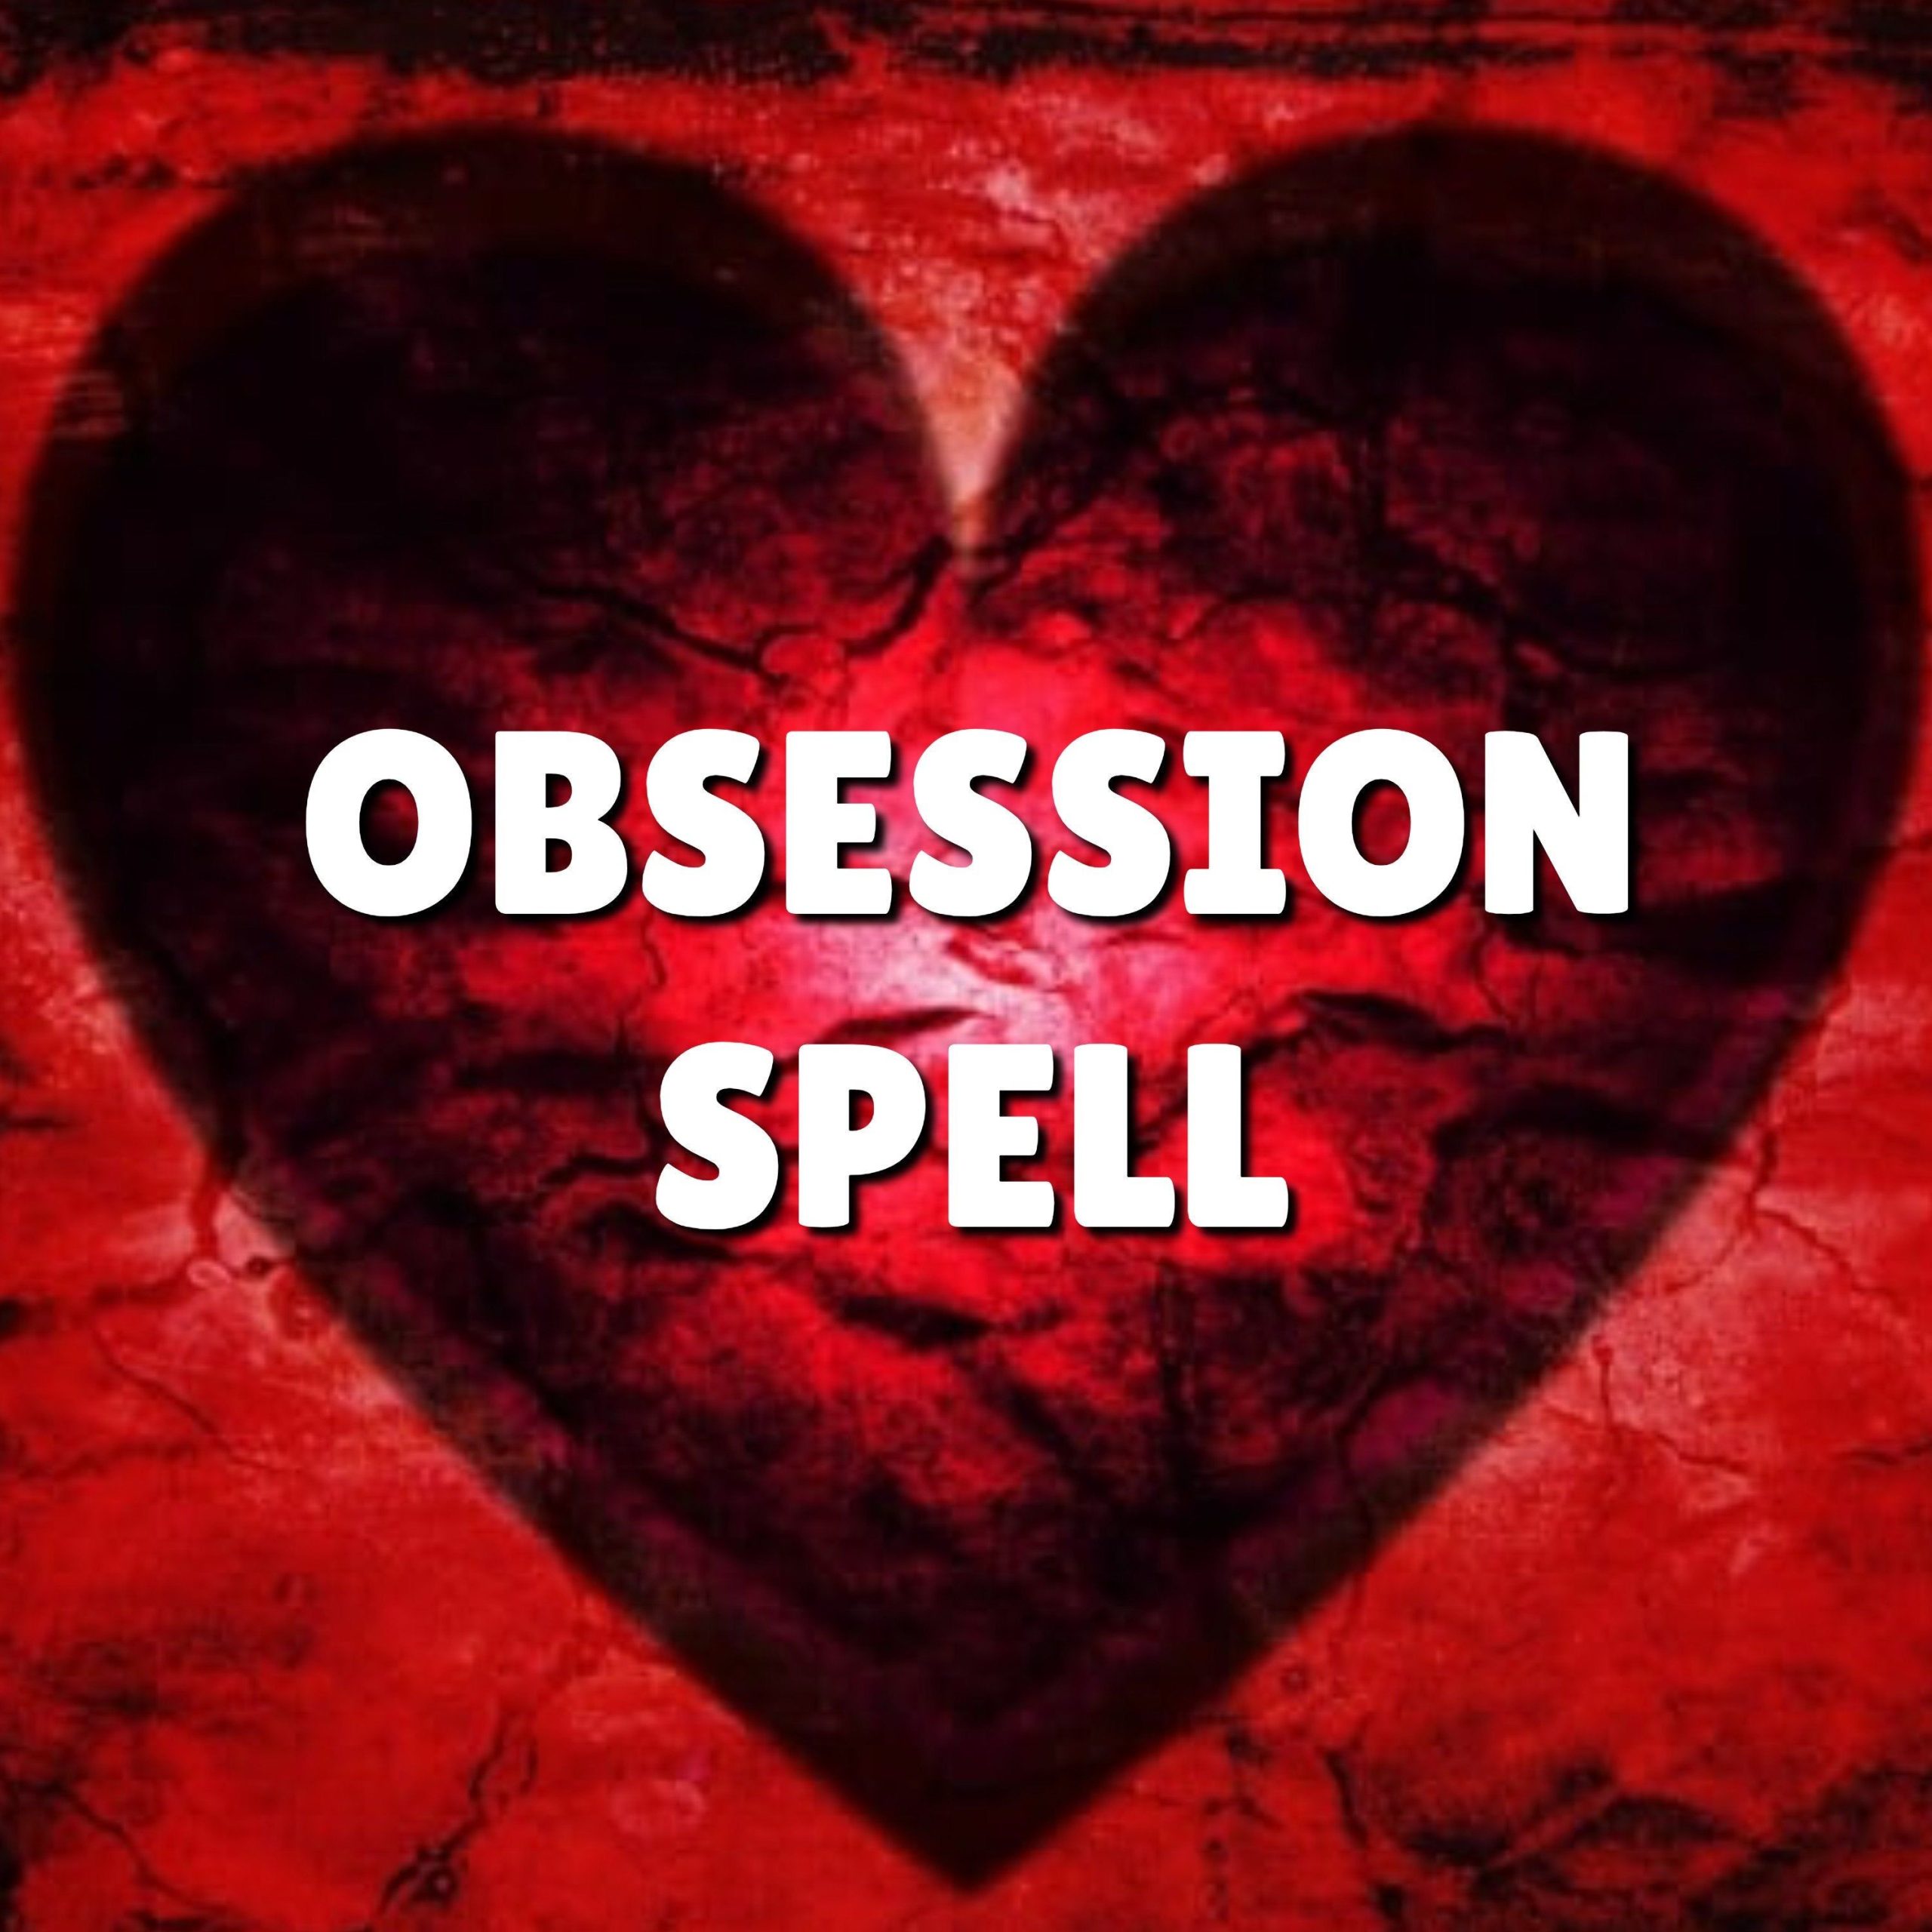 Obsession love spell